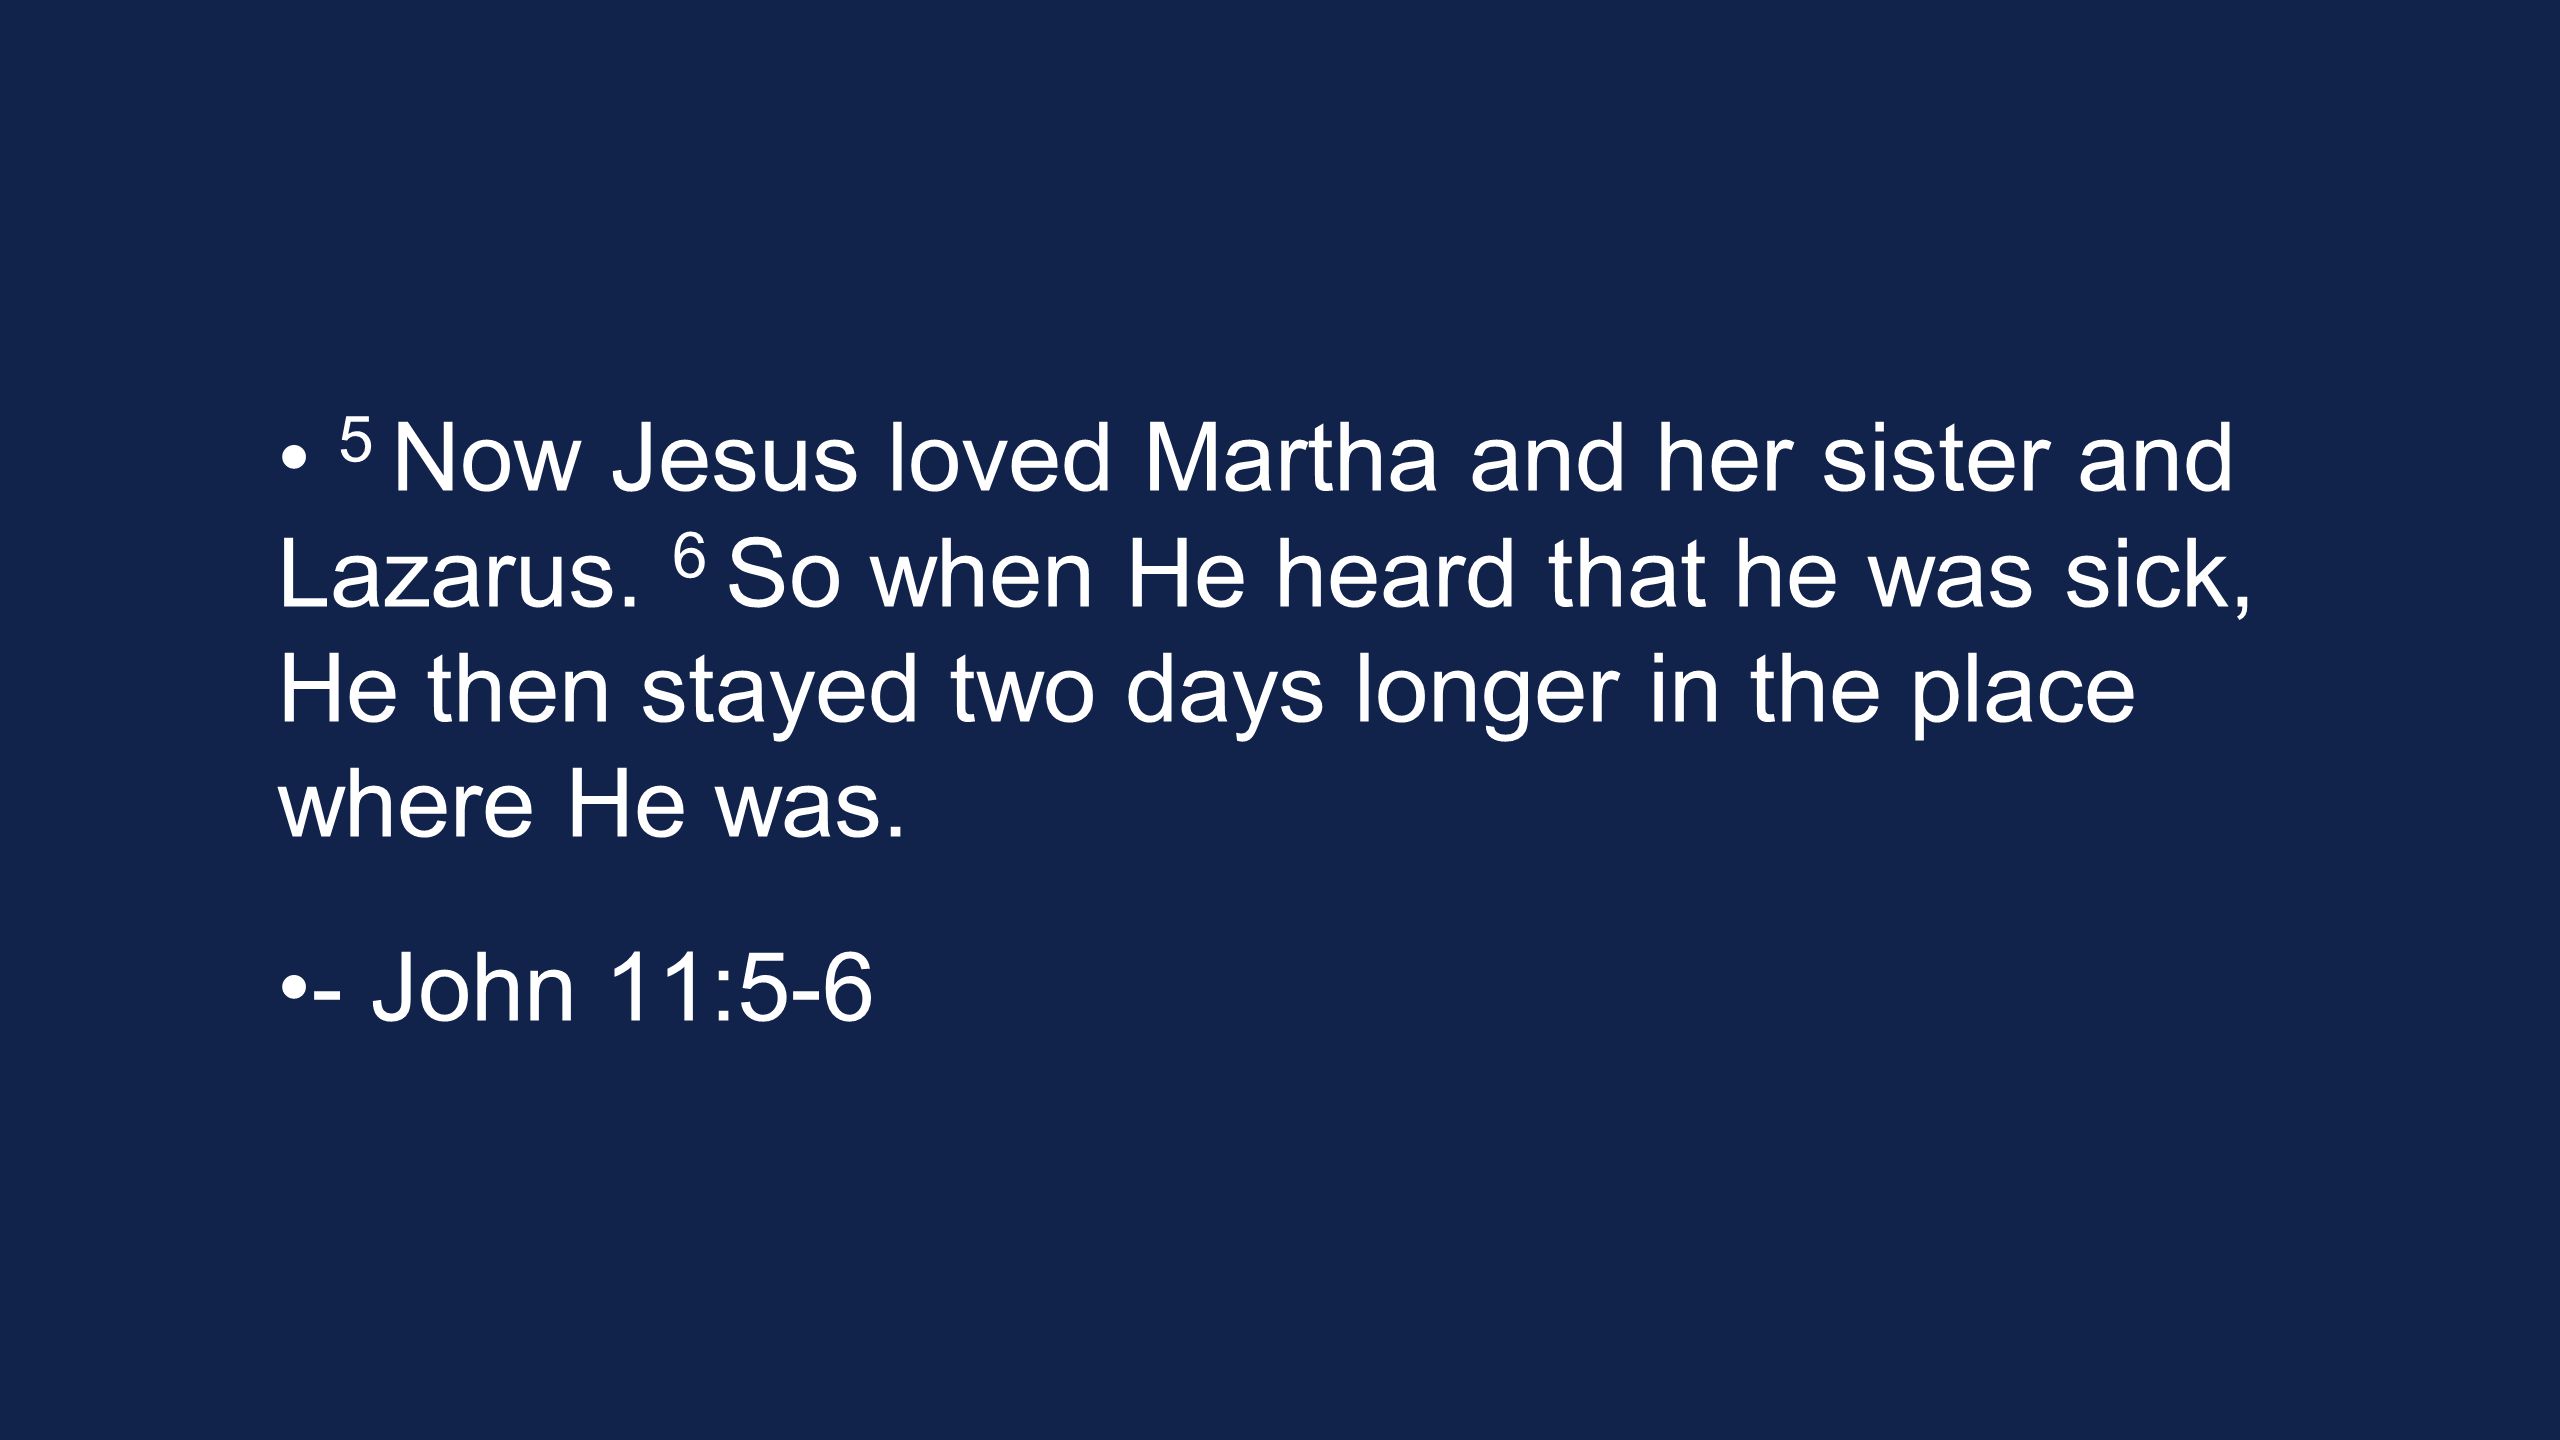 5 Now Jesus loved Martha and her sister and Lazarus.